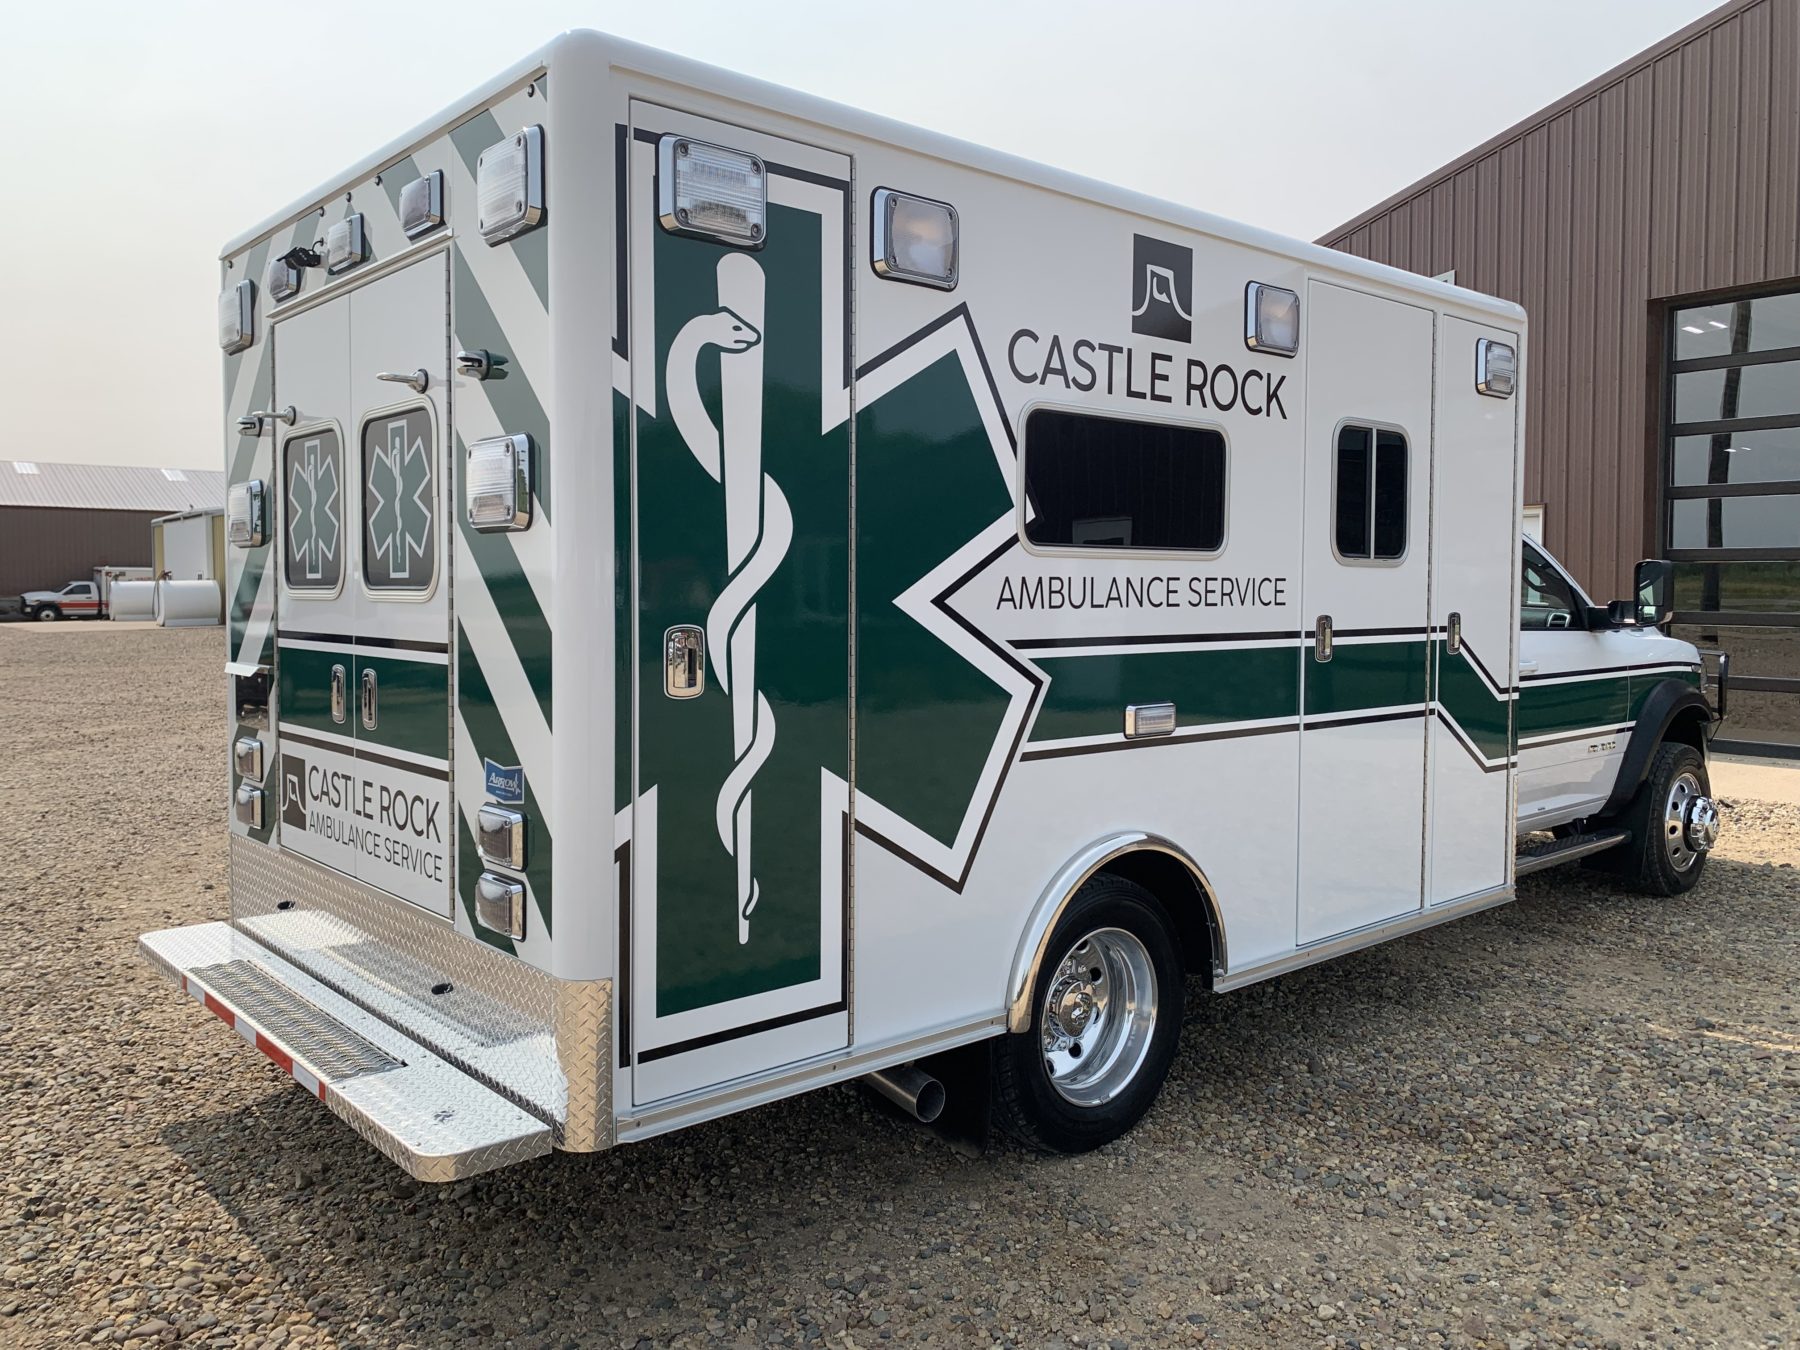 2022 Ram 4500 4x4 Heavy Duty Ambulance For Sale – Picture 10